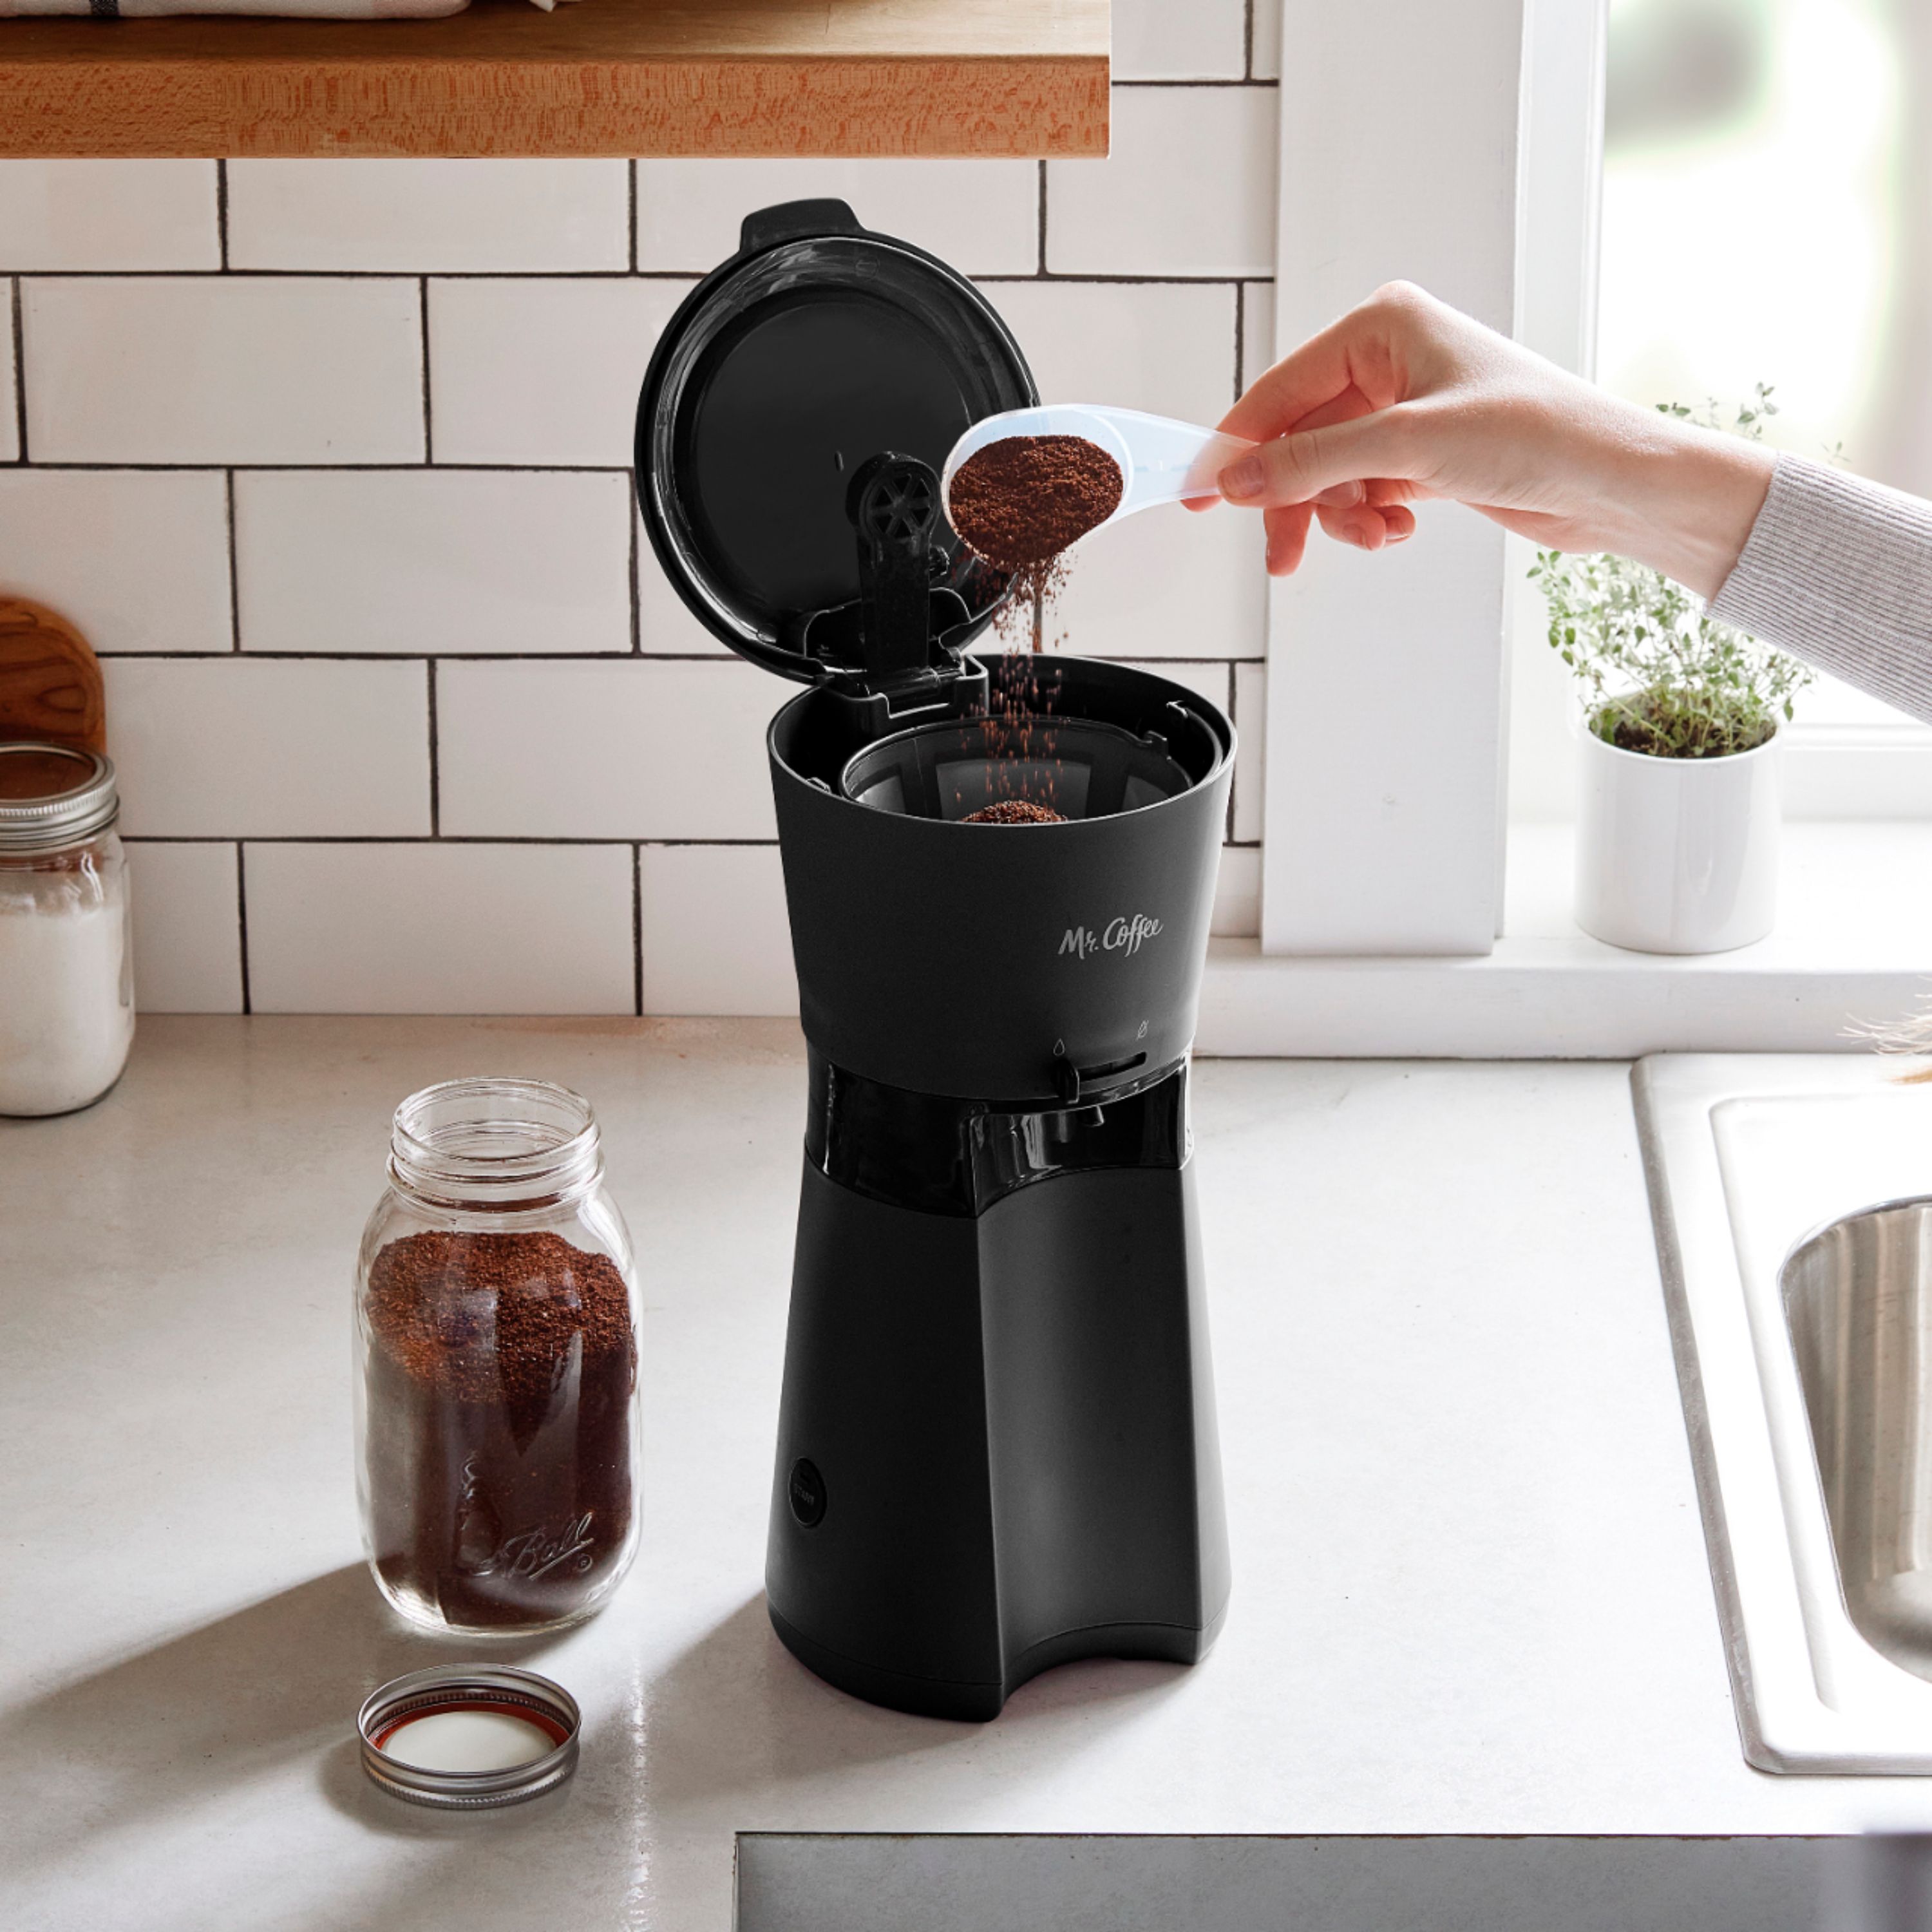 Mr Coffee Iced Coffee Maker with Reusable Tumbler and Coffee Filter Black 